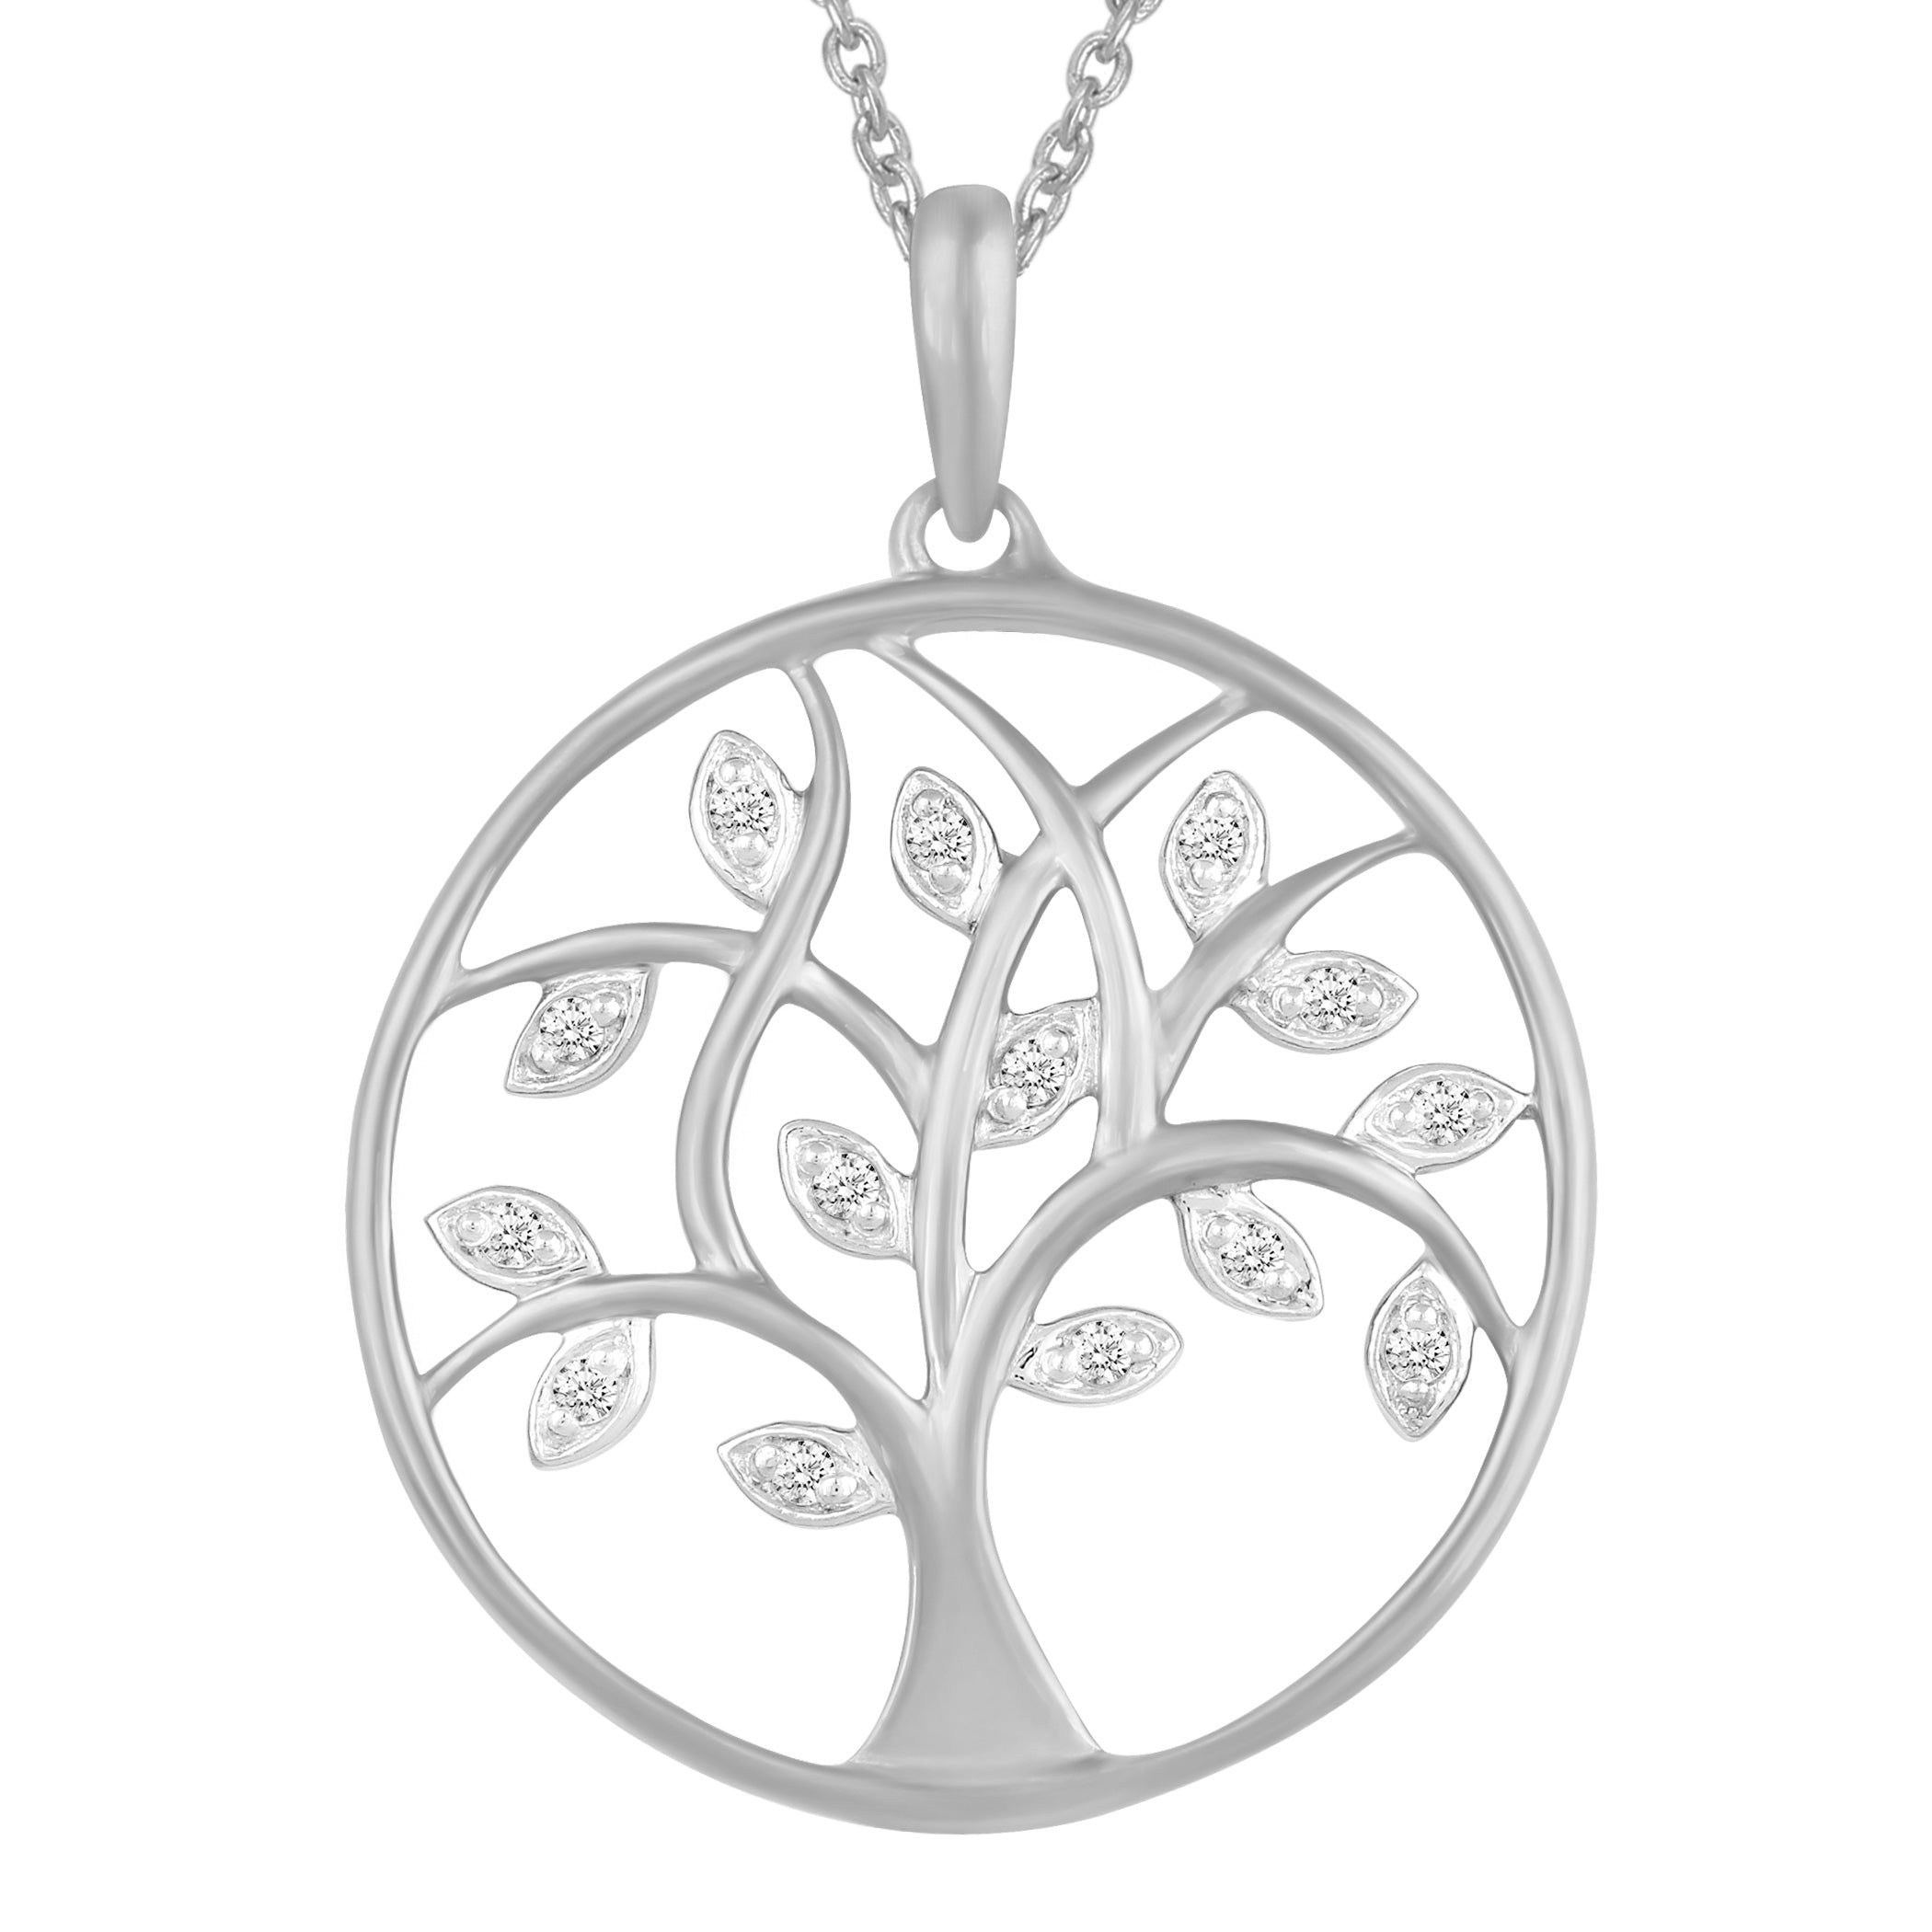 Family silver circle of life necklace - Charli Bird